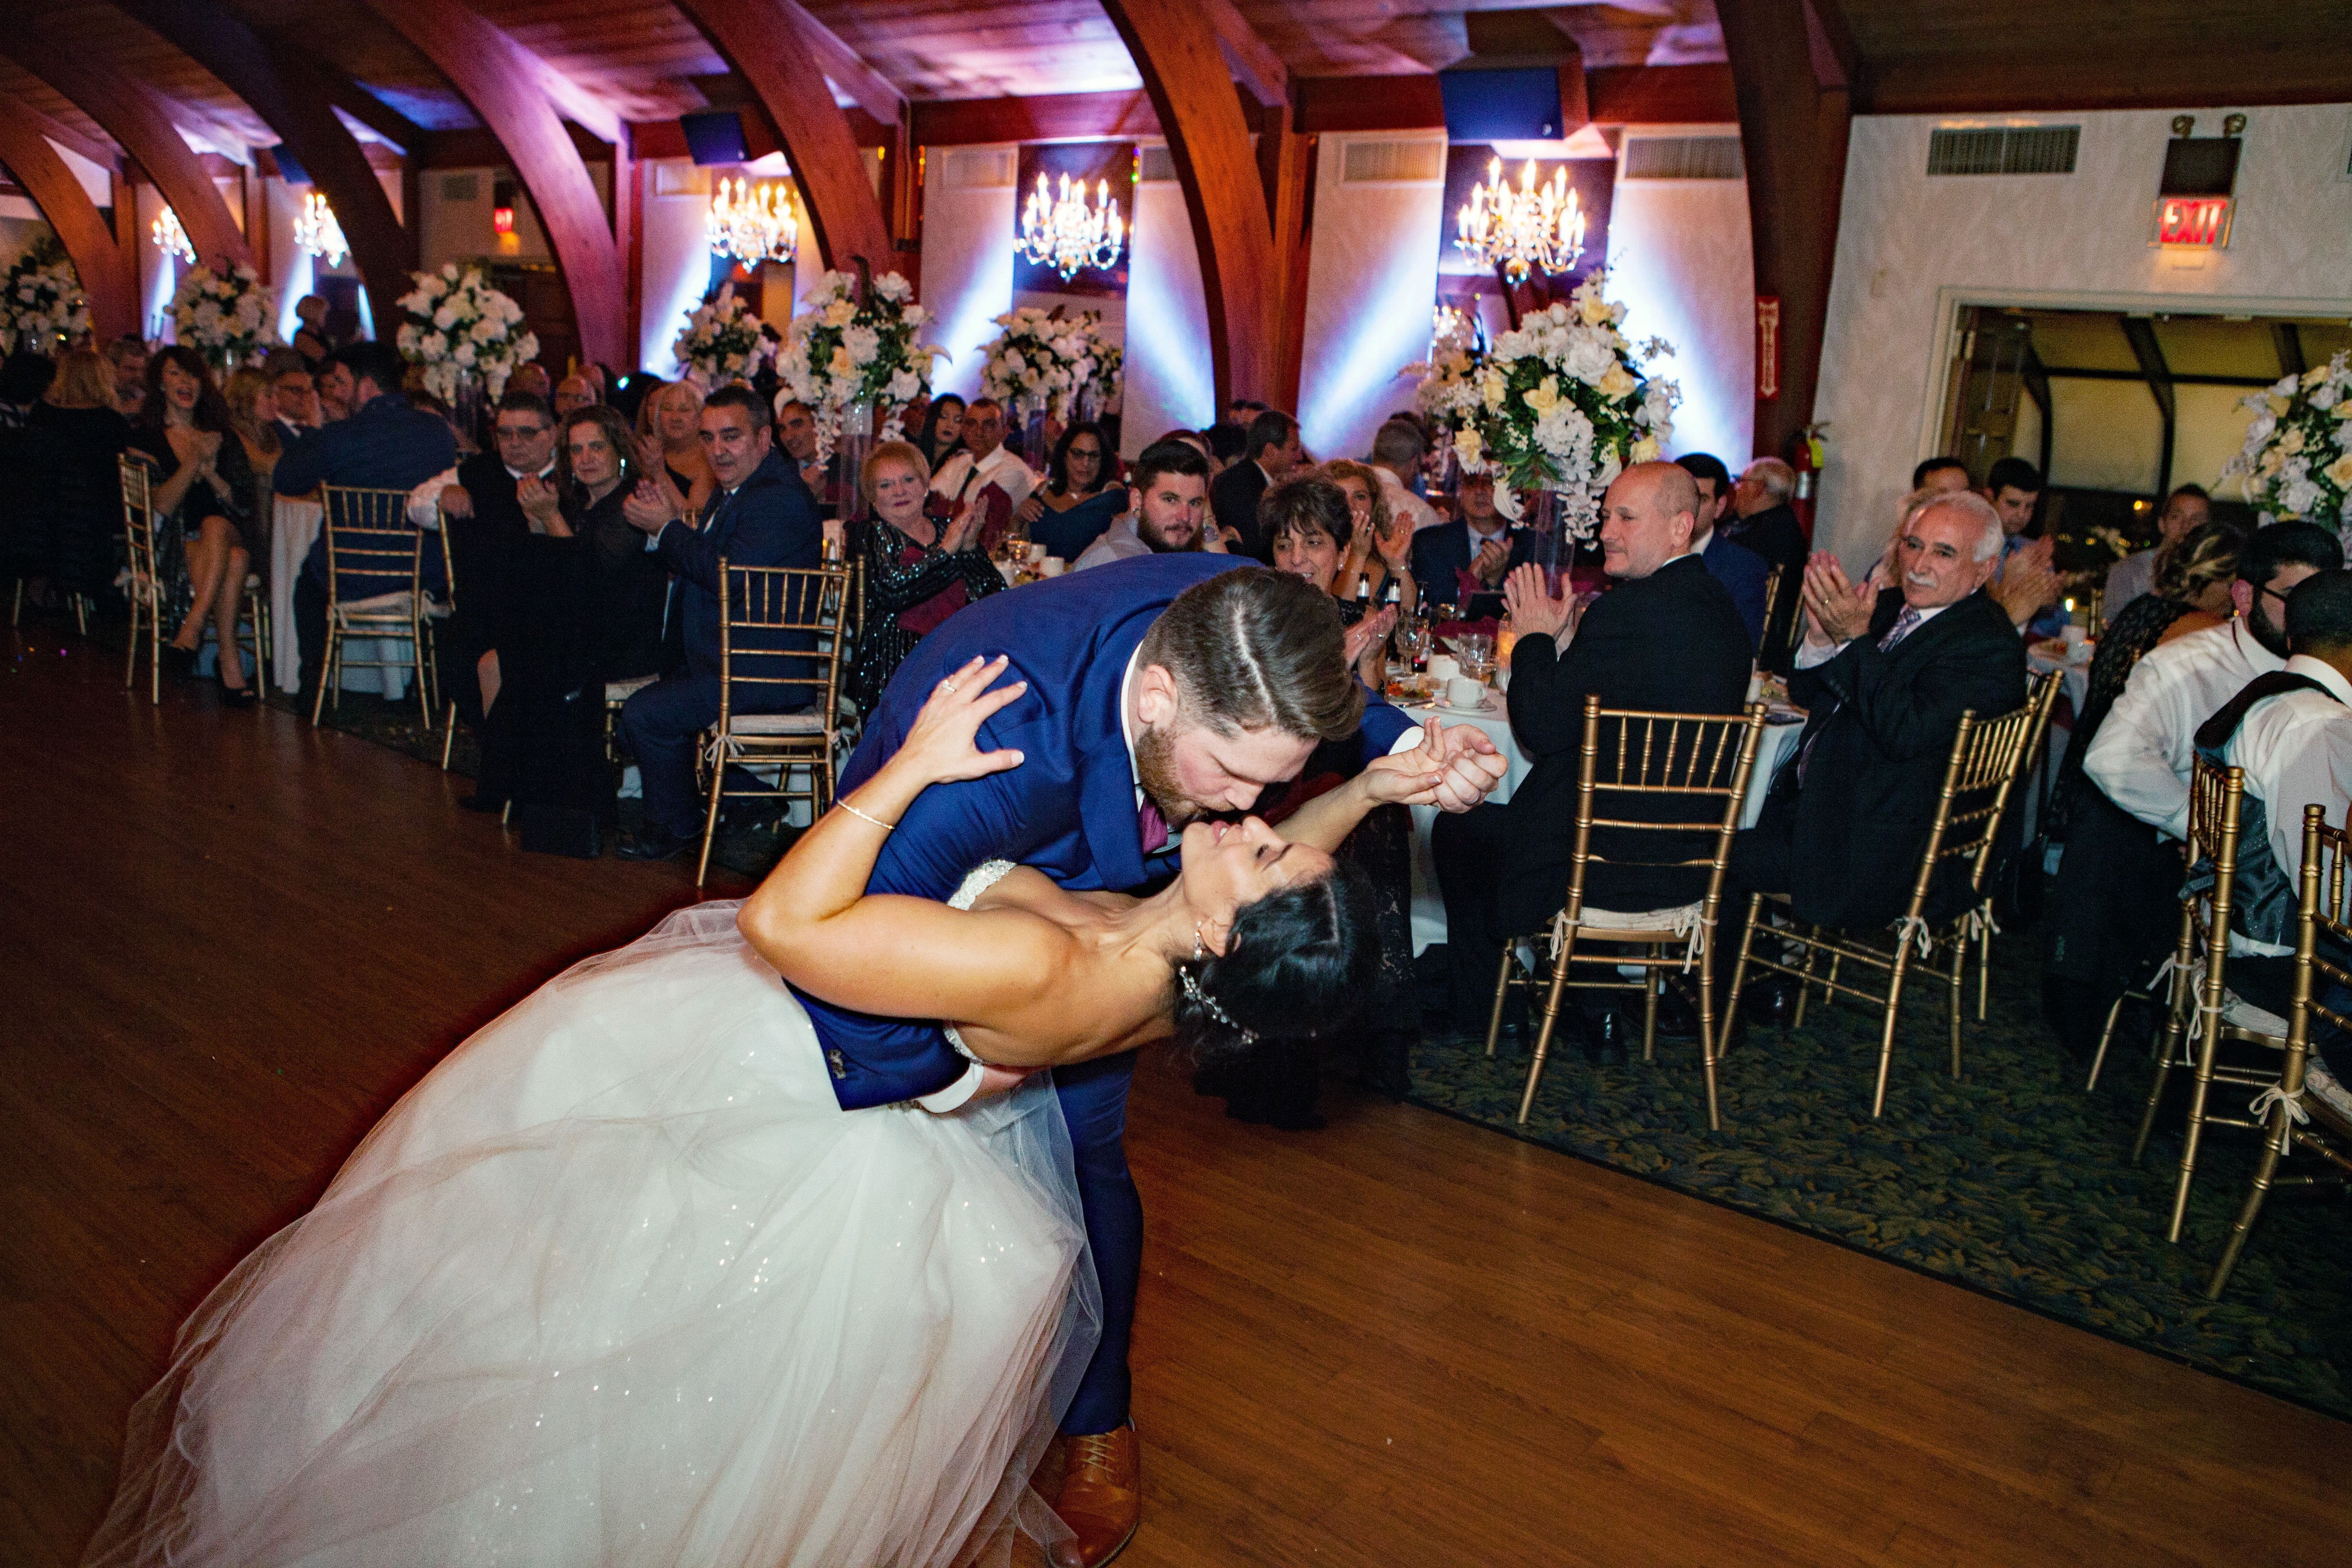 Groom dipping his bride. Photo by Tylerstar Productions.